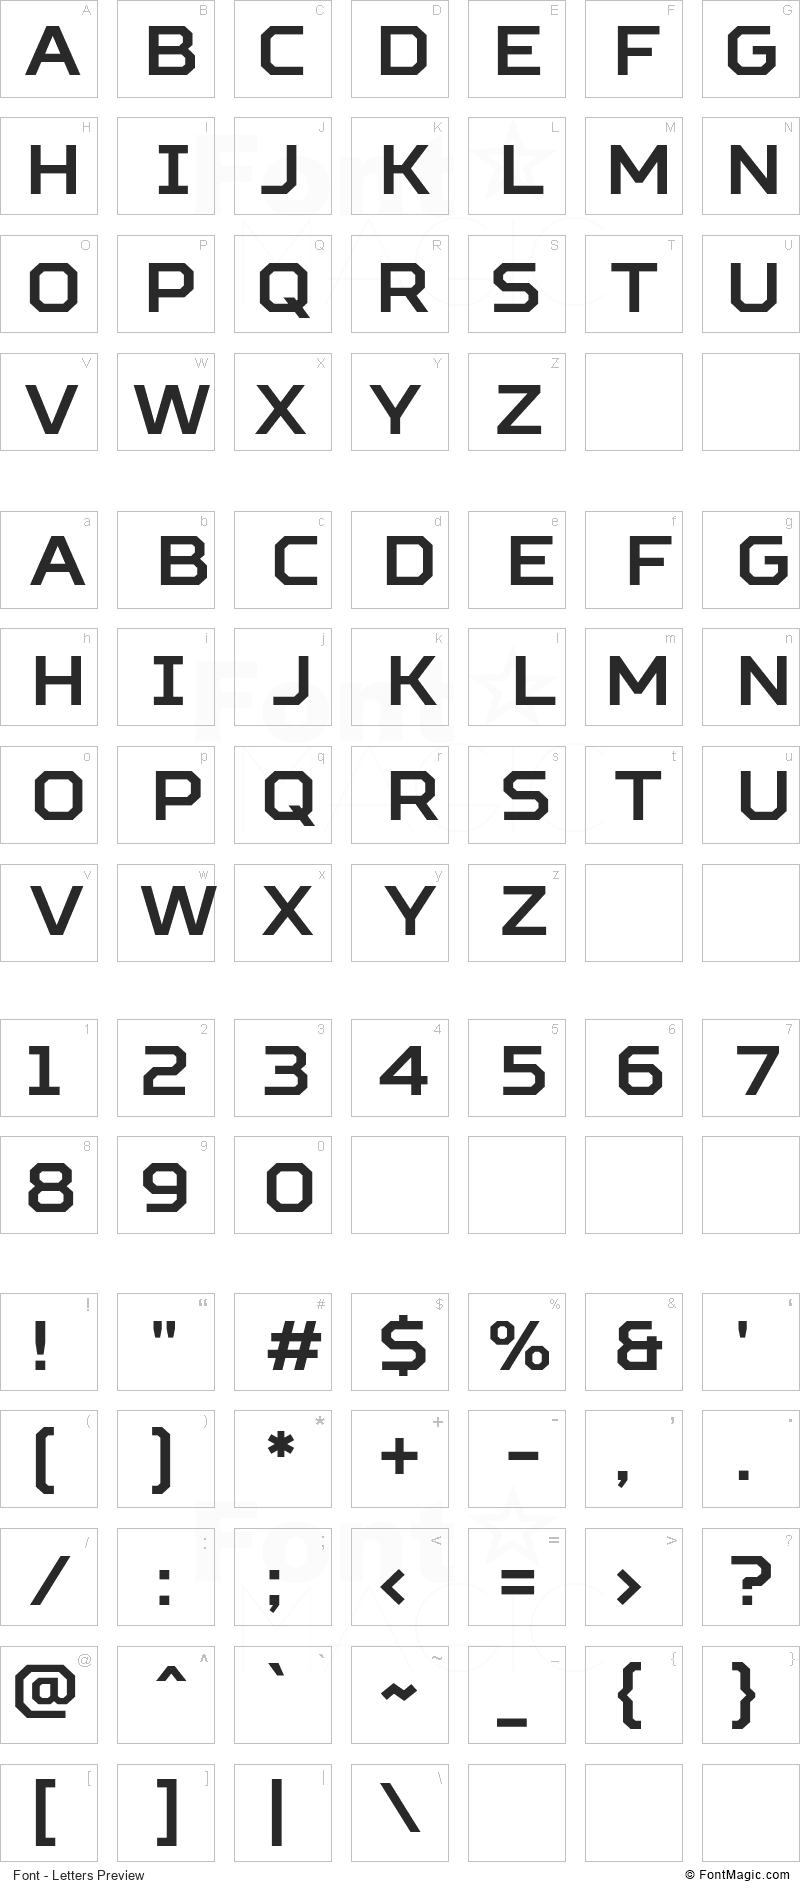 Squares Font - All Latters Preview Chart